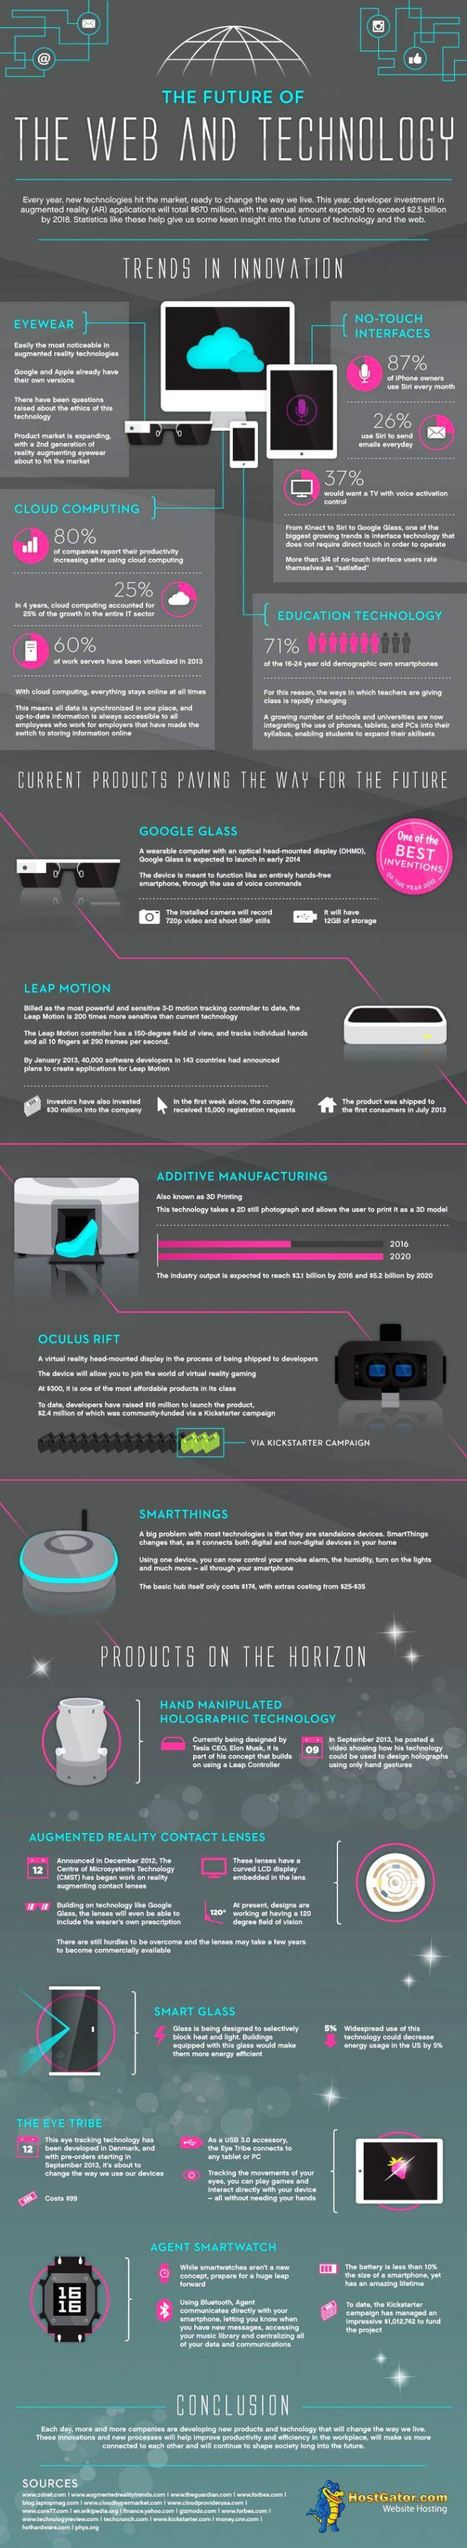 The Future of Web and Technology [Infographic] | Daily Magazine | Scoop.it